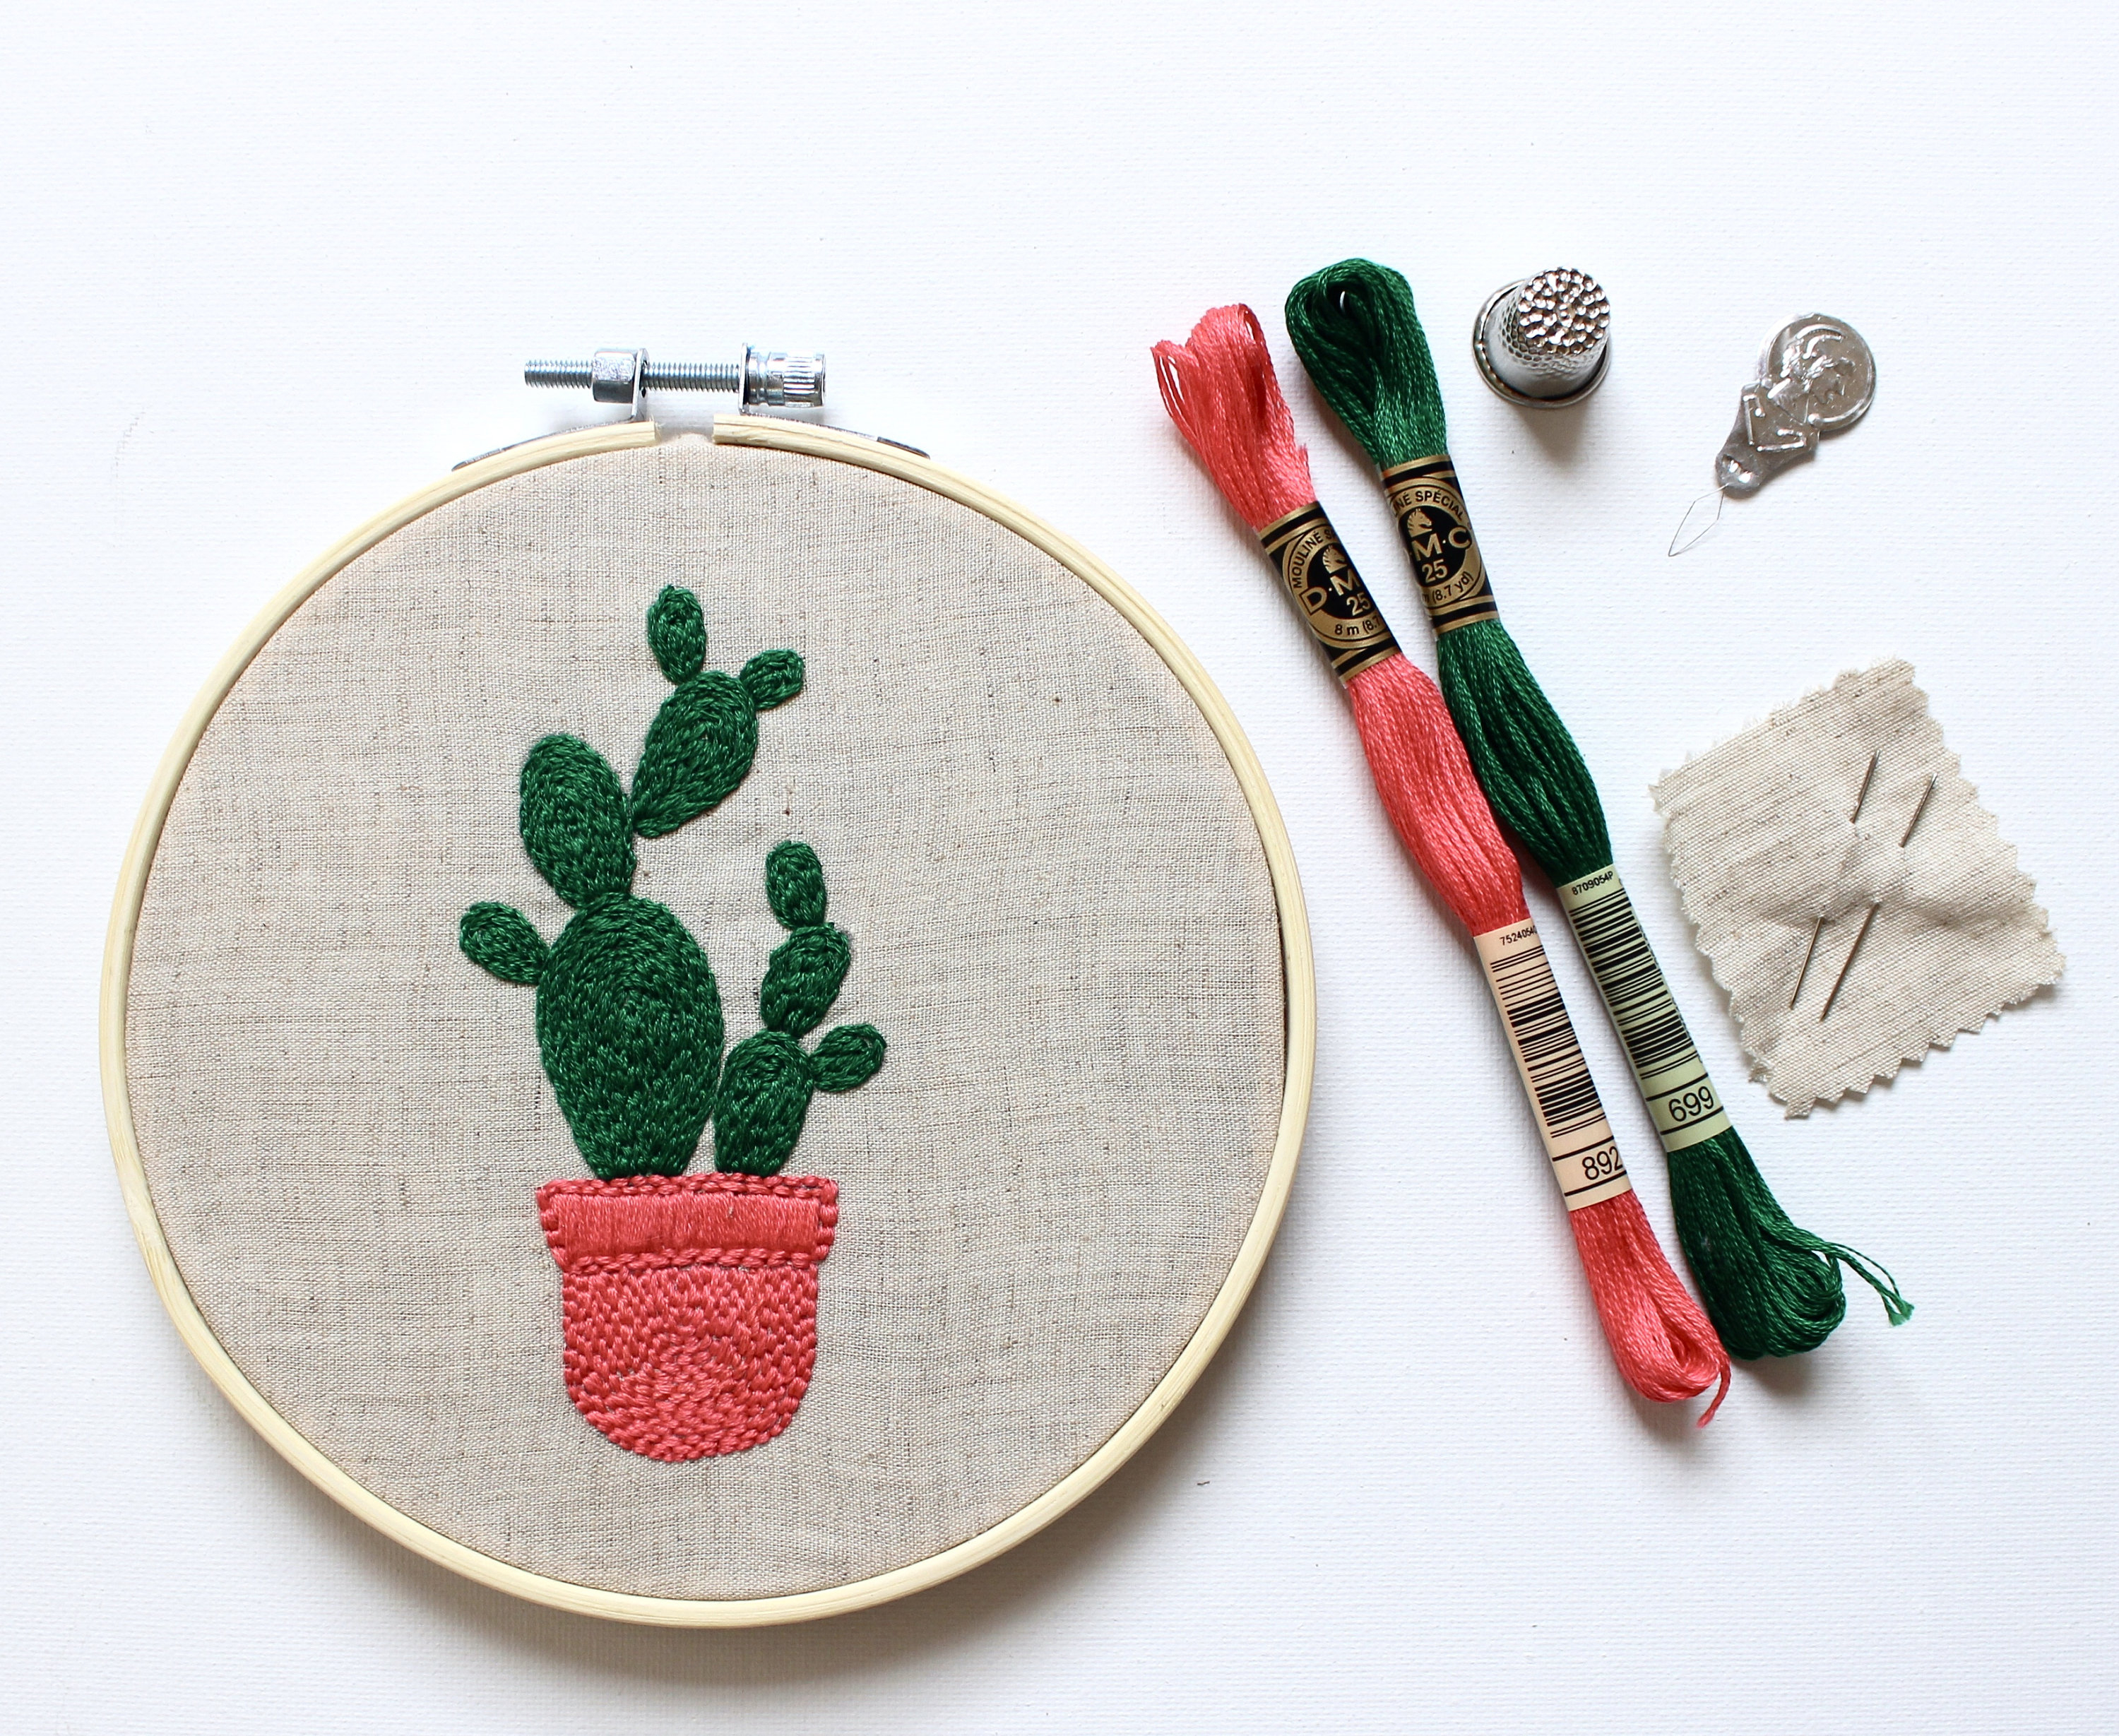 Make Your Own Embroidery Pattern Embroidery Kit Diy Make Your Own Solo Cactus Embroidery Pattern